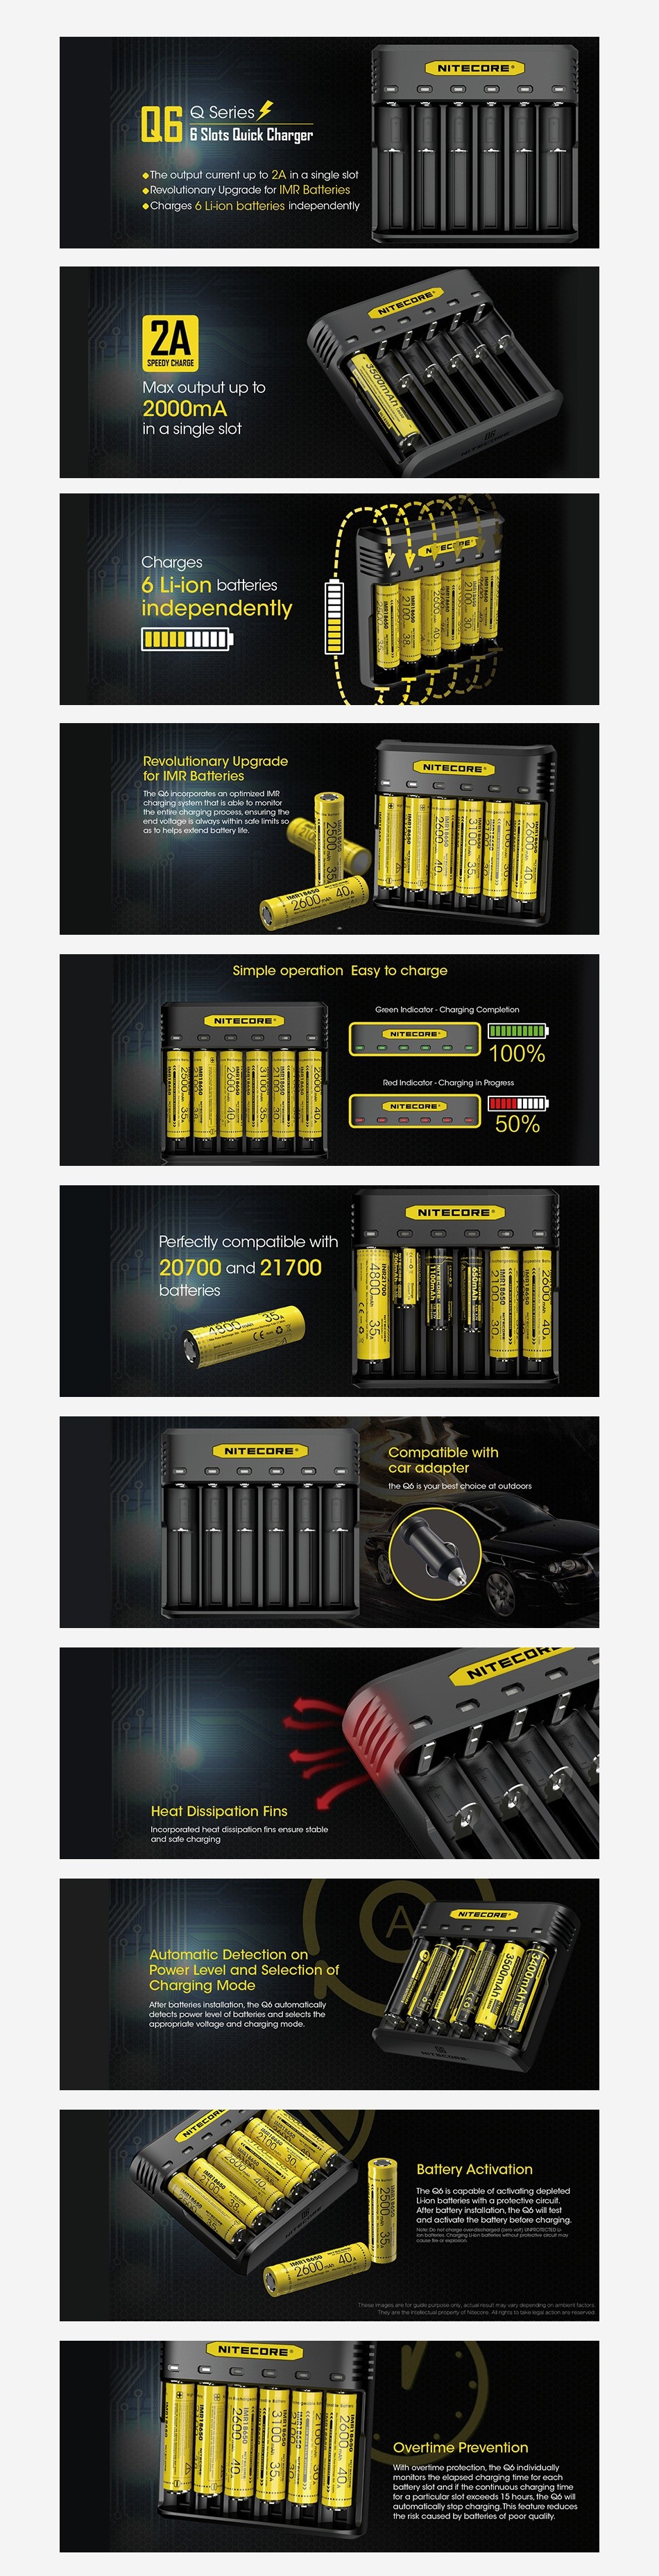 Nitecore Q6 6 Slots Quick Charger L on batteries ndapen 2A 2000mA nasing dependents Simple operation Easy to charge CNITECORI L aars 5004 NTE  RE catie with 20700and21700 Heat Dissipation Fil    NITE